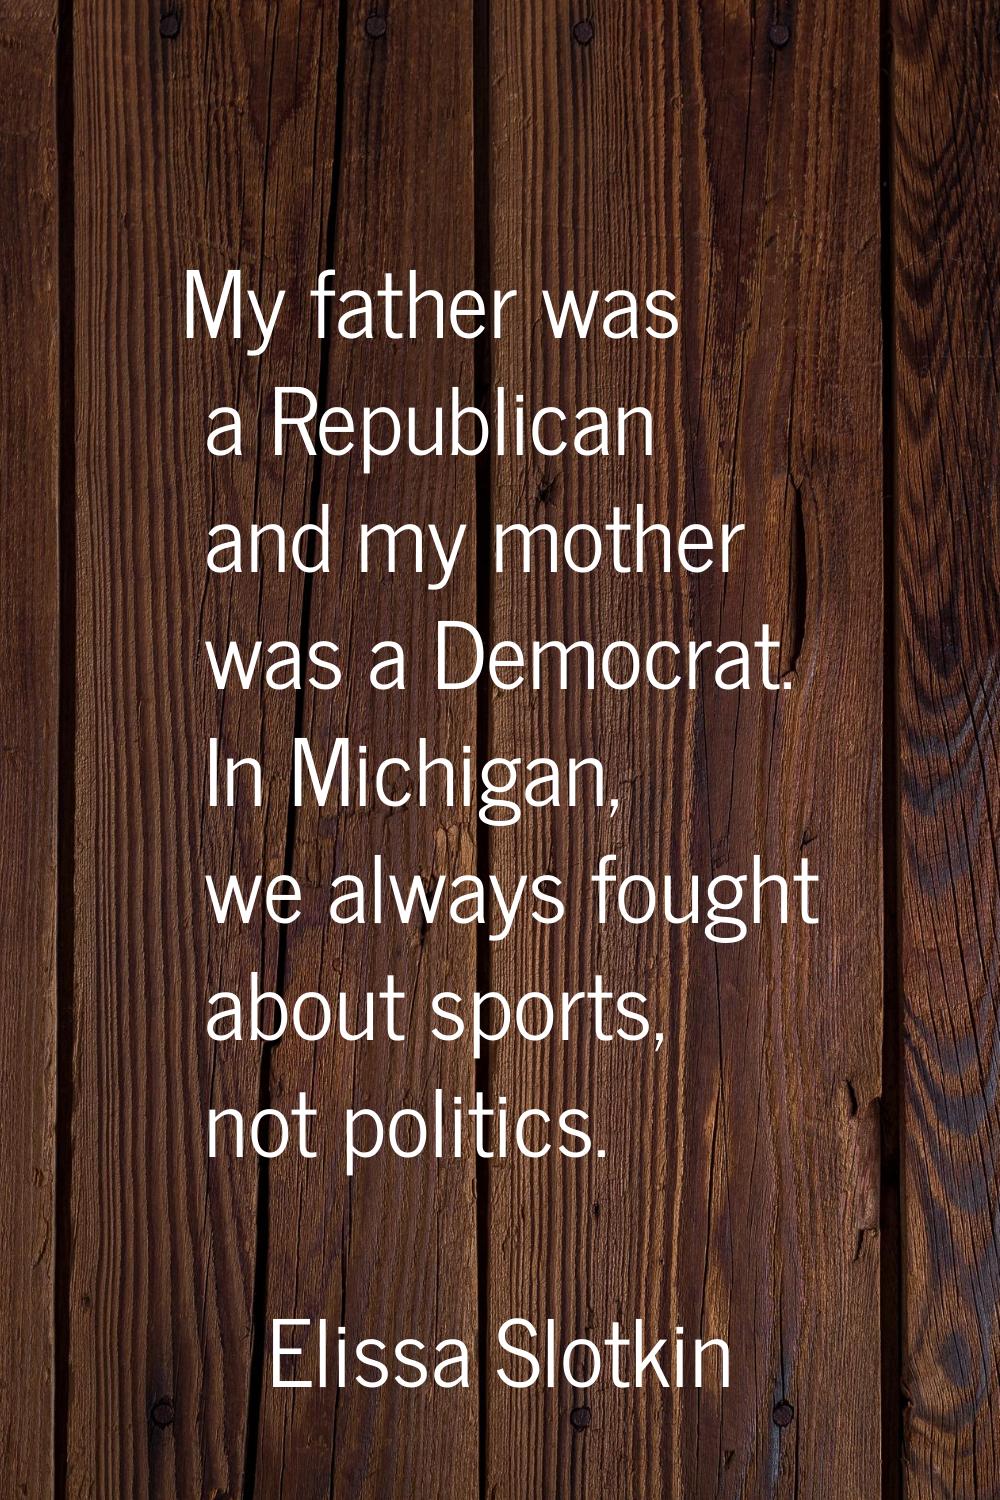 My father was a Republican and my mother was a Democrat. In Michigan, we always fought about sports